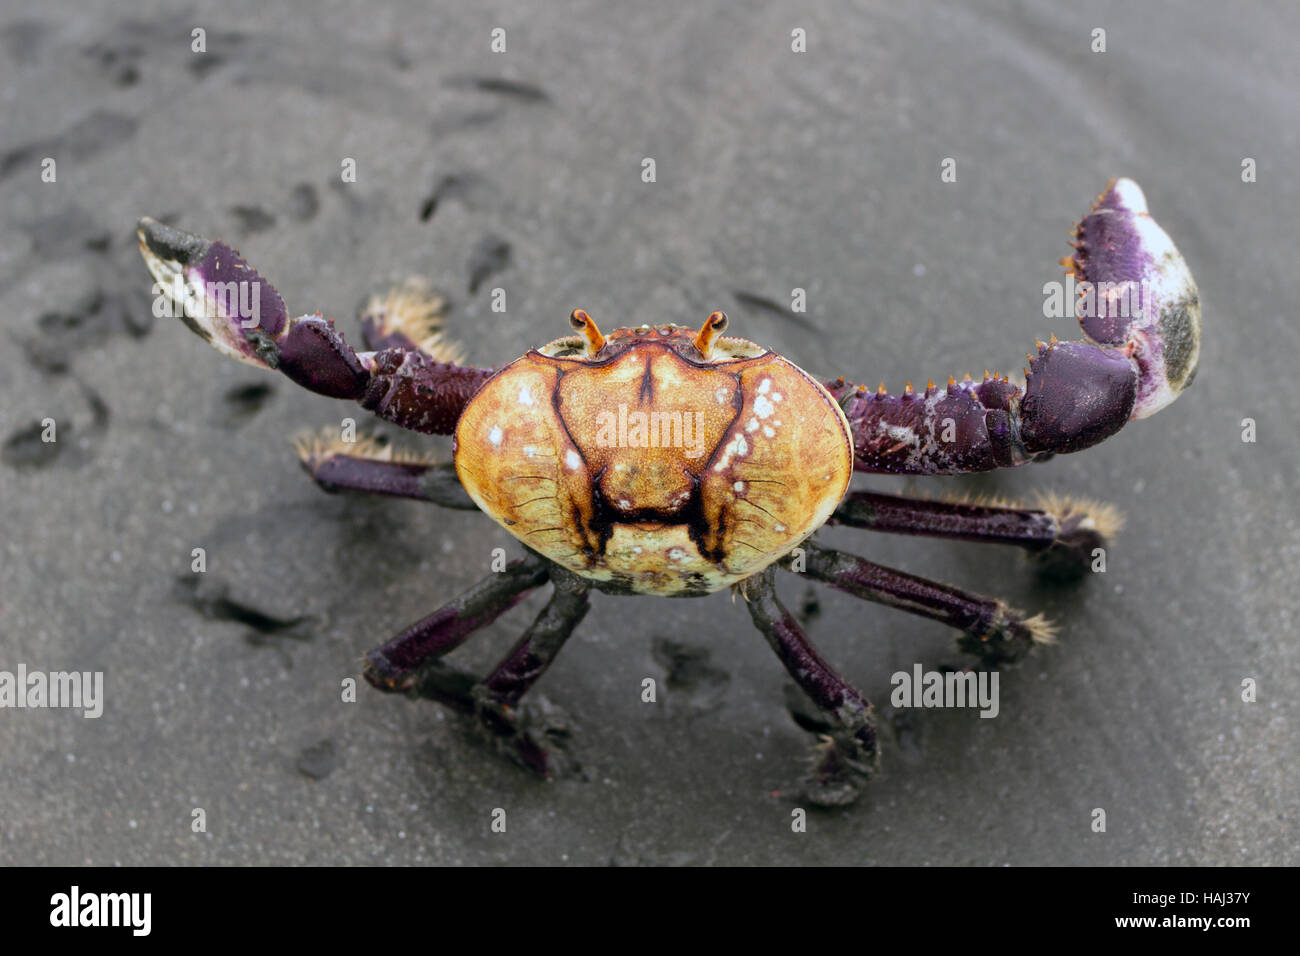 Mangrove crab (Ucides cordatus) known as 'caraguejo uçá' walking on the beach Stock Photo